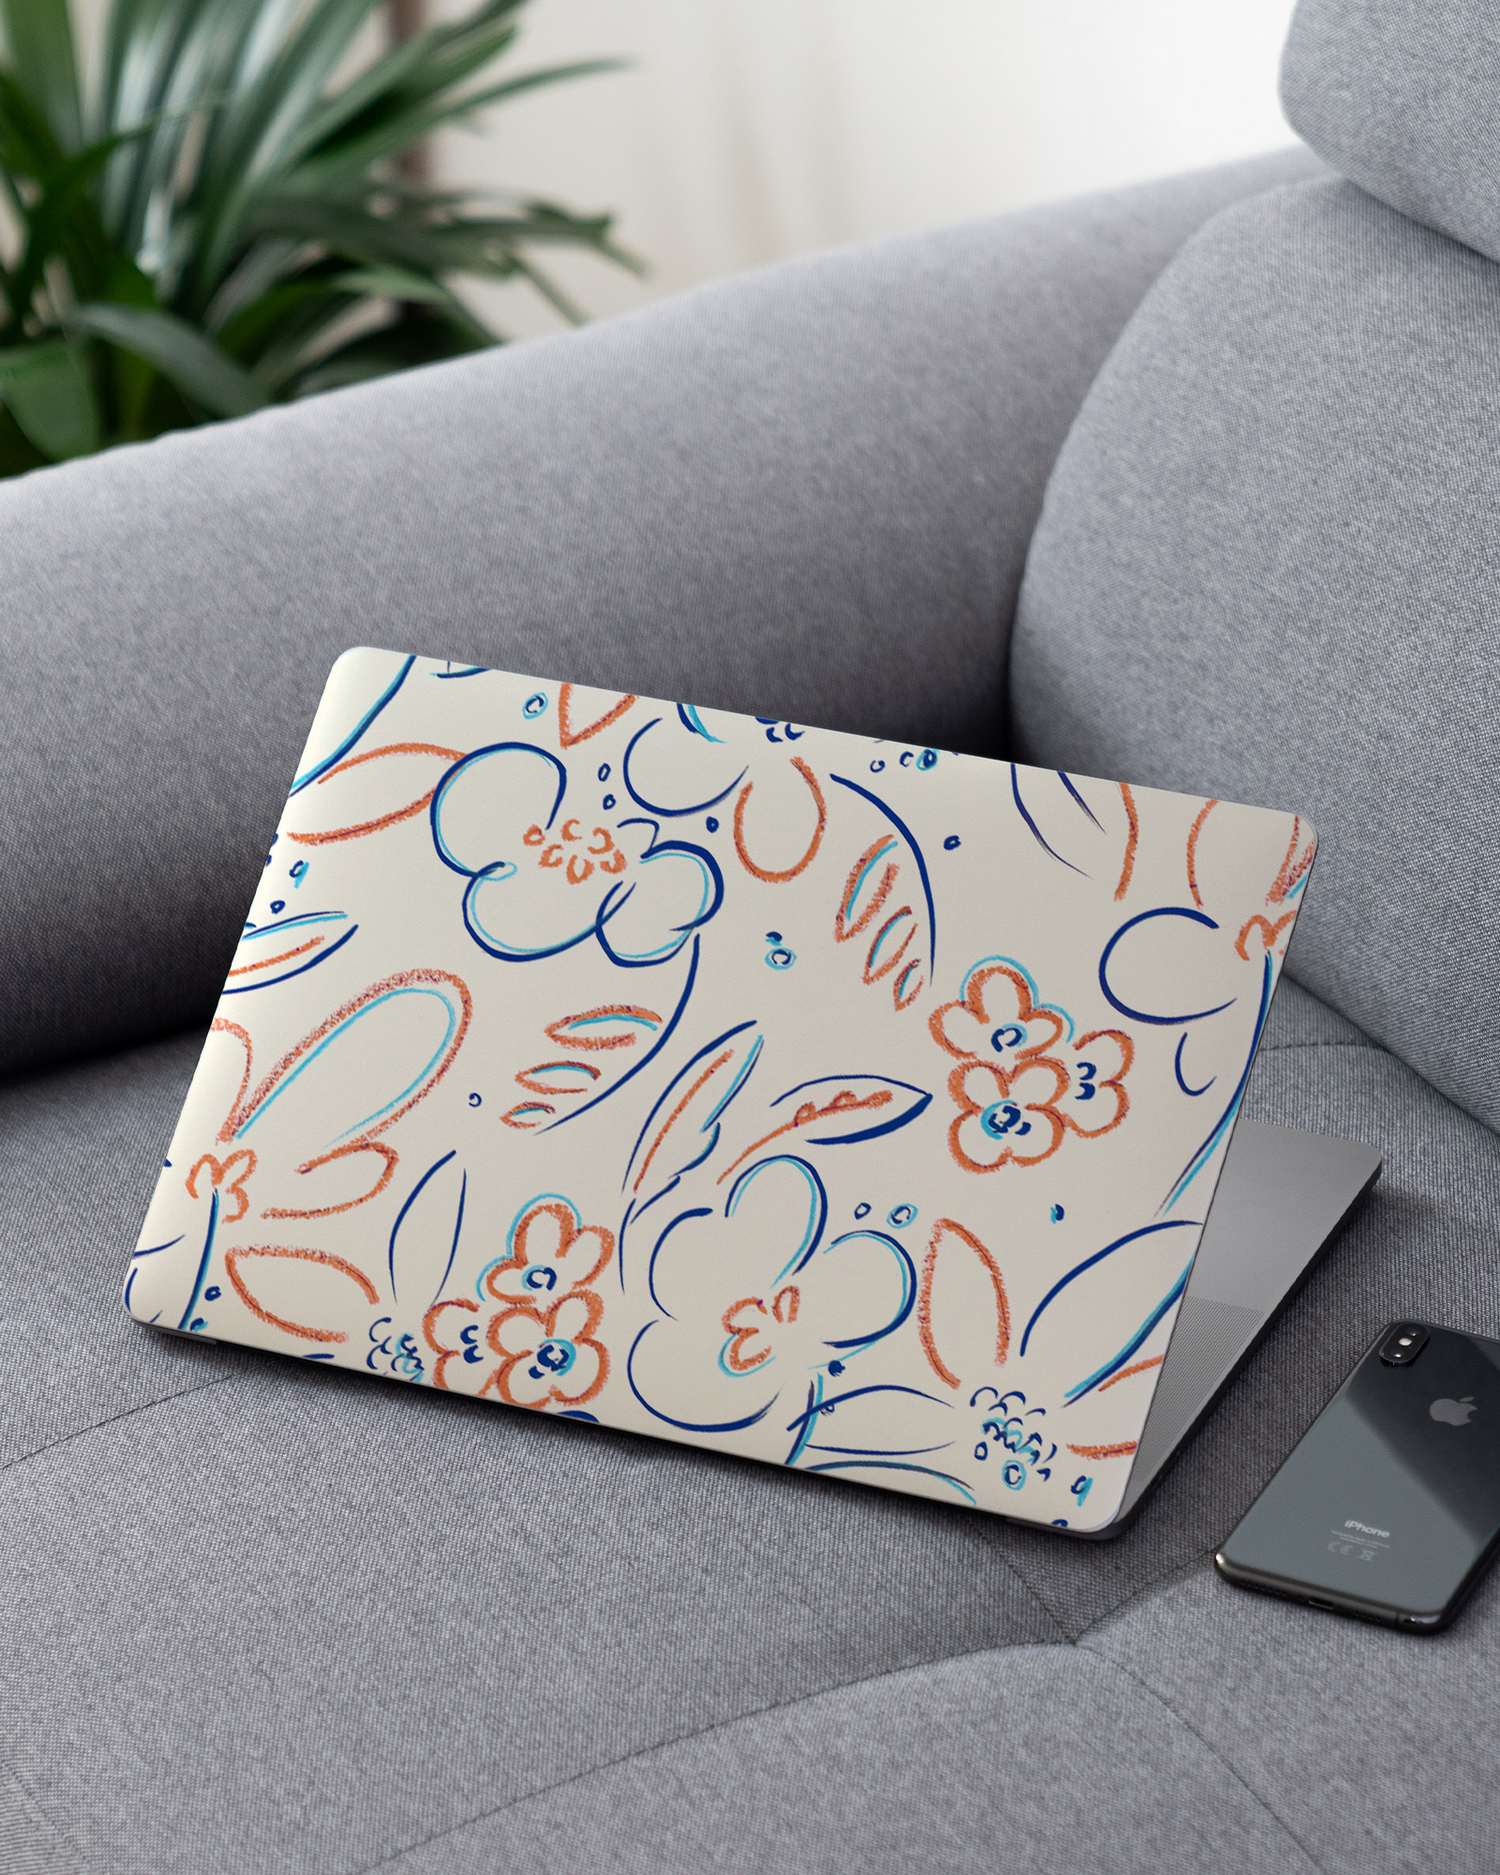 Bloom Doodles Laptop Skin for 13 inch Apple MacBooks on a couch